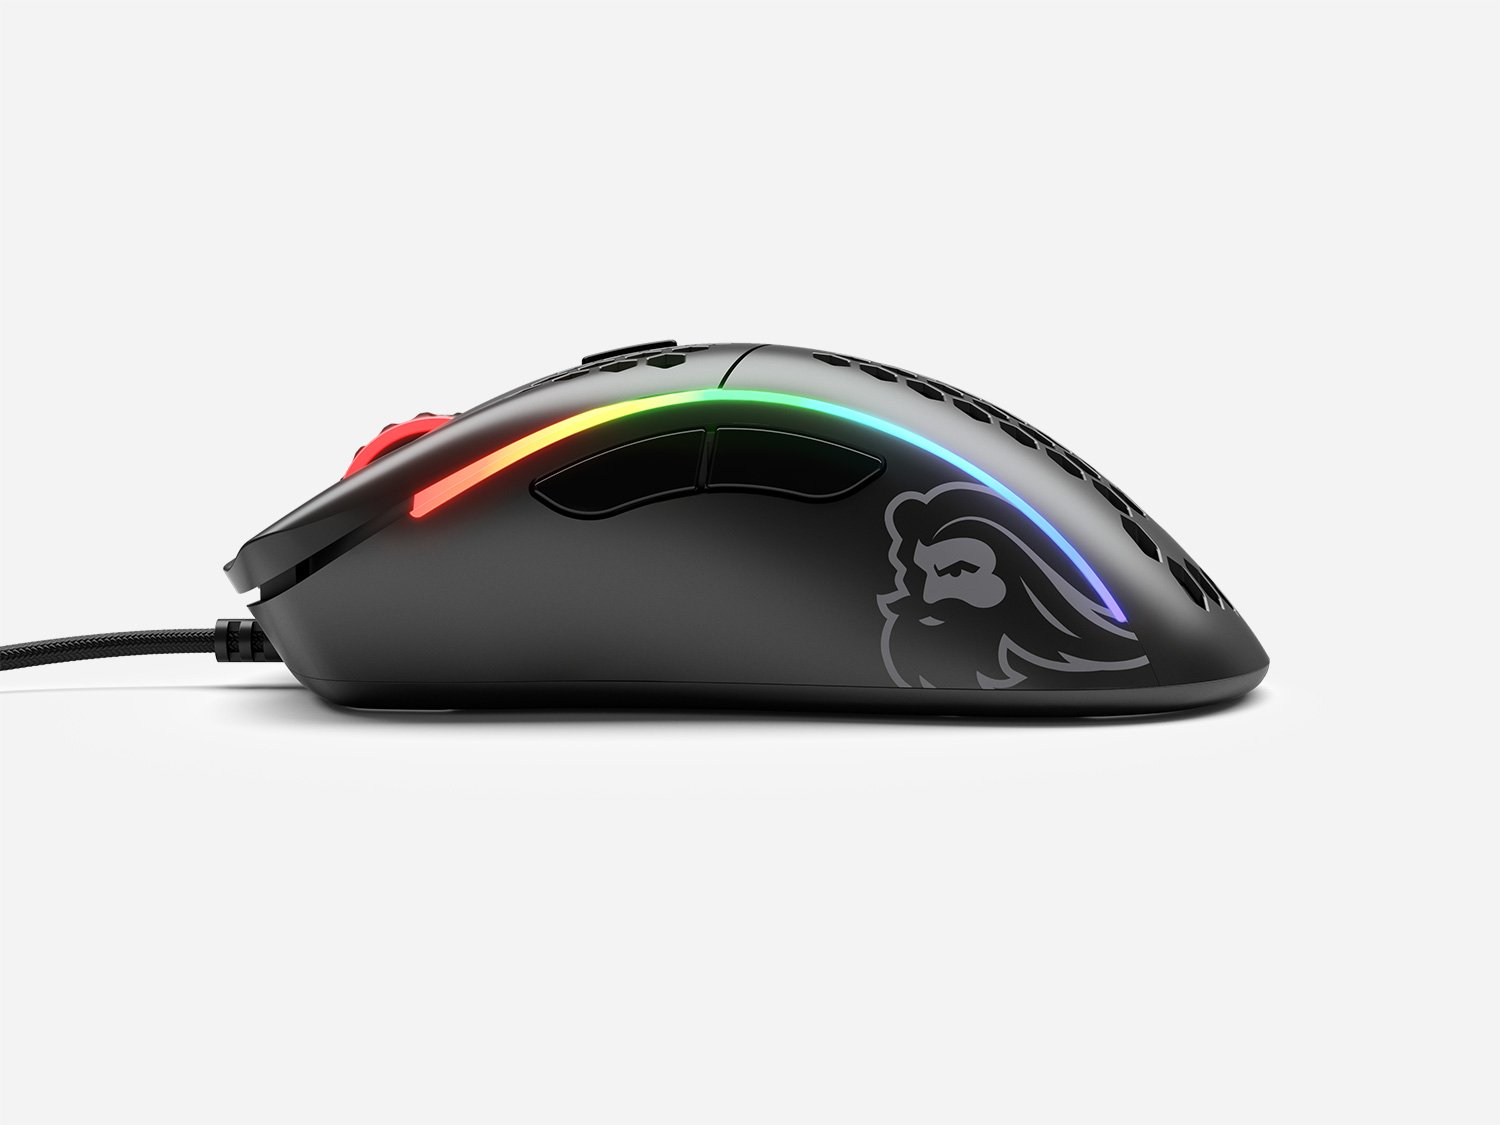 Glorious Gives Consumers The Model D Lightweight Gaming Mouse Legit Reviews Glorious Has Finally Unleashed Their Highly Anticipated D